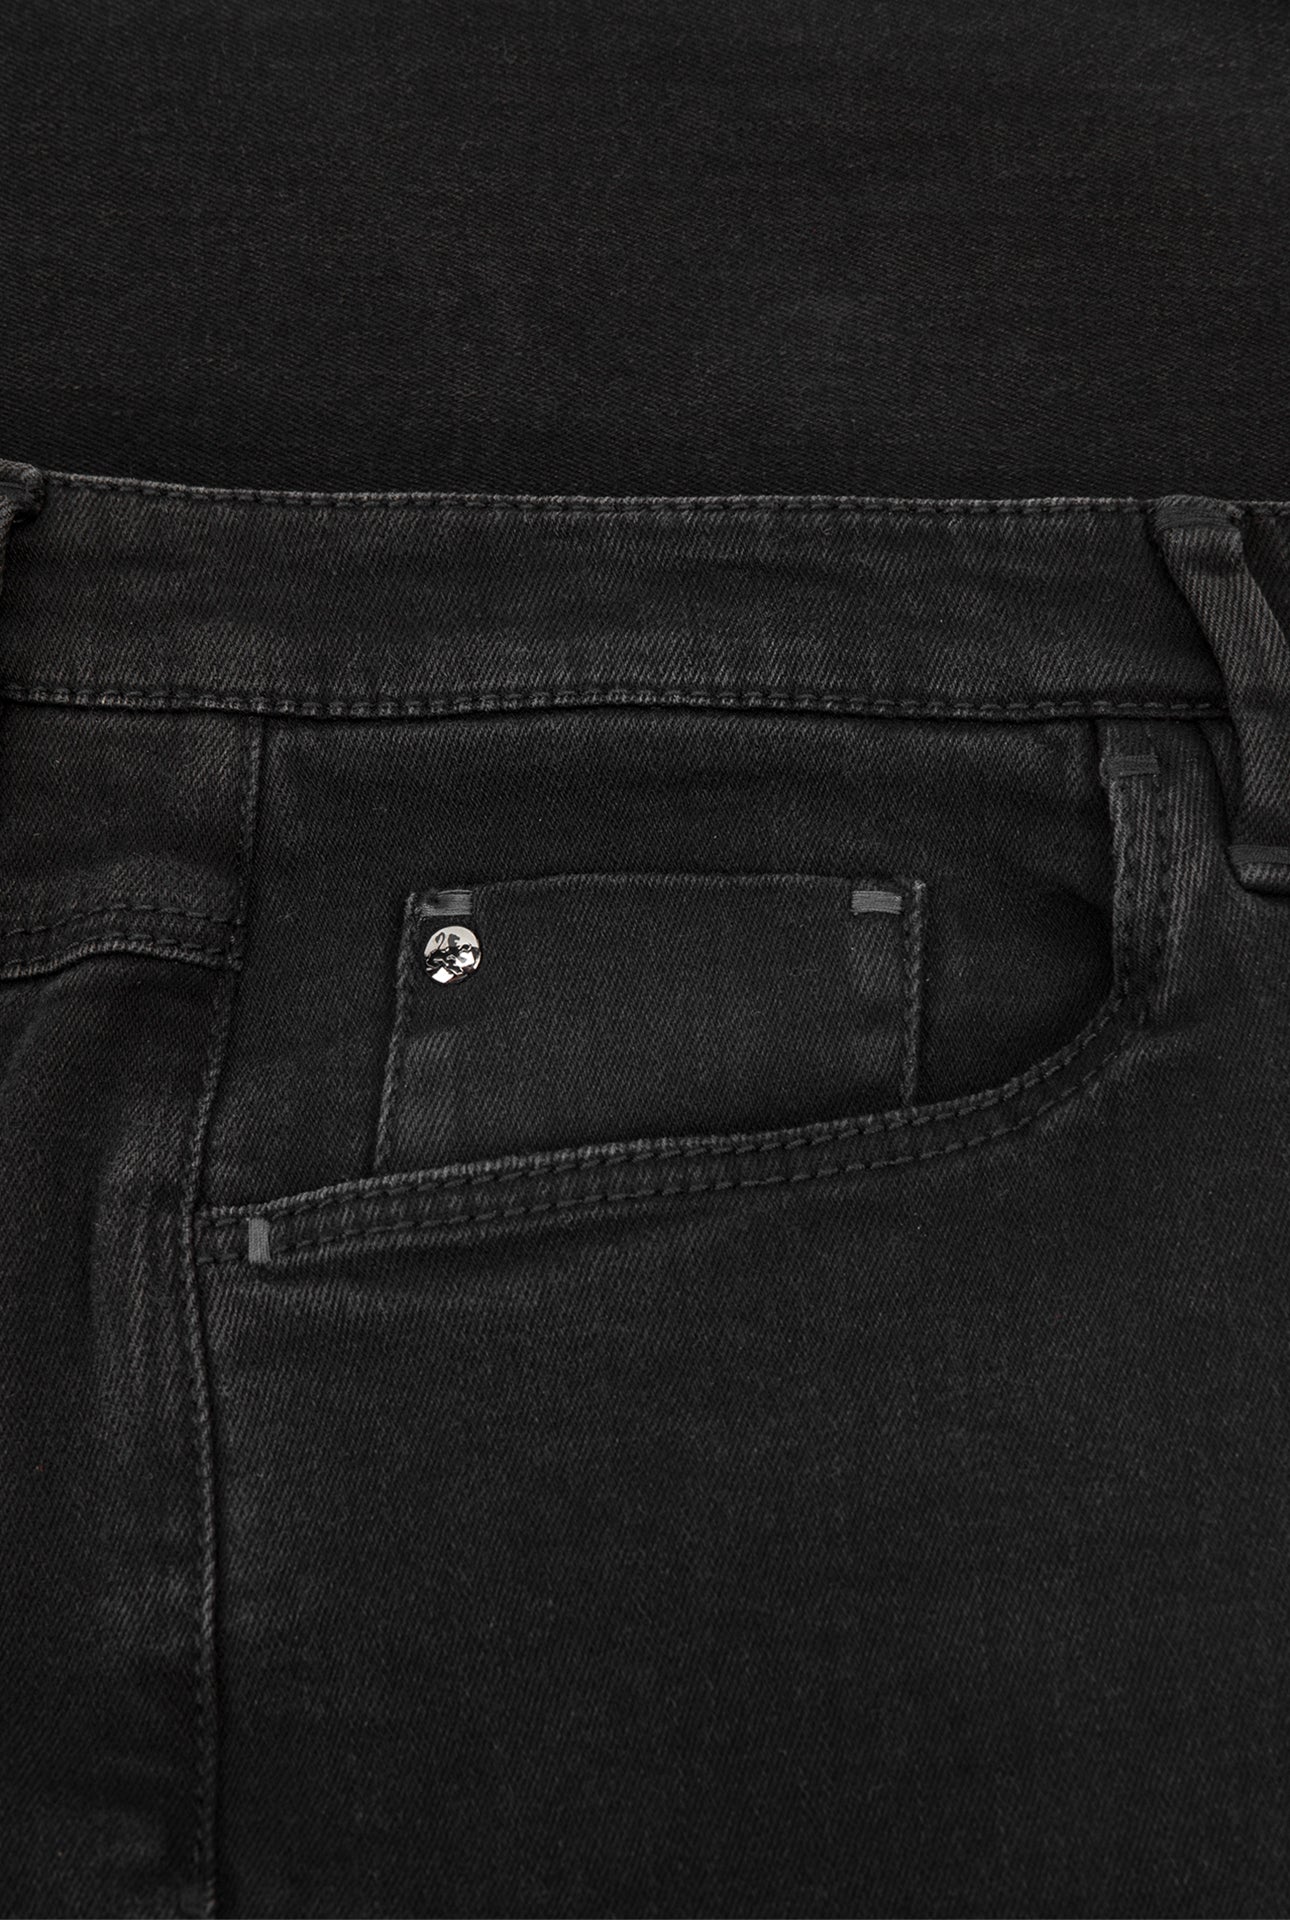 Slim Fit Jeans in Cotton